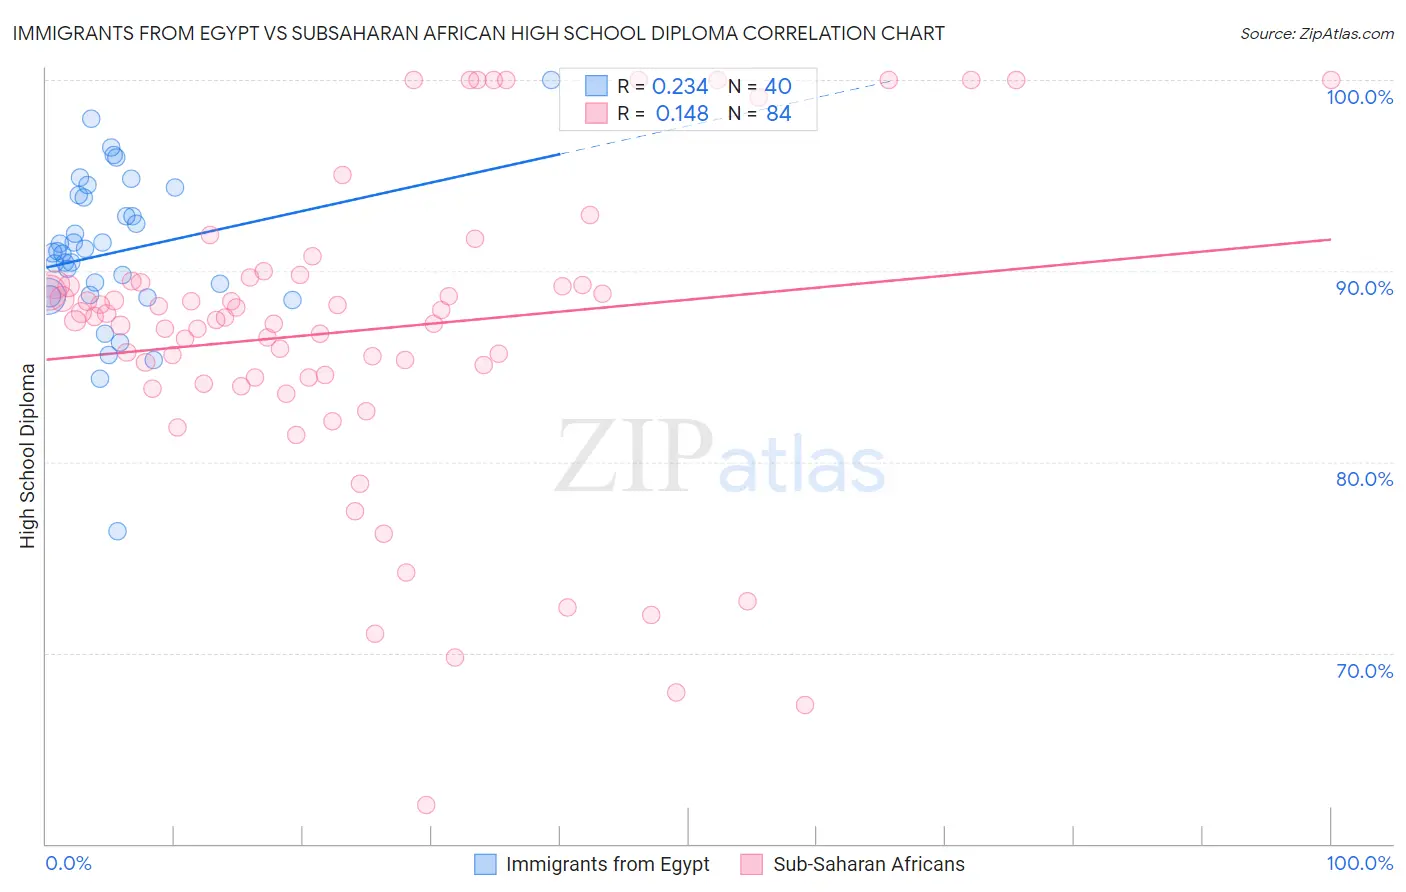 Immigrants from Egypt vs Subsaharan African High School Diploma